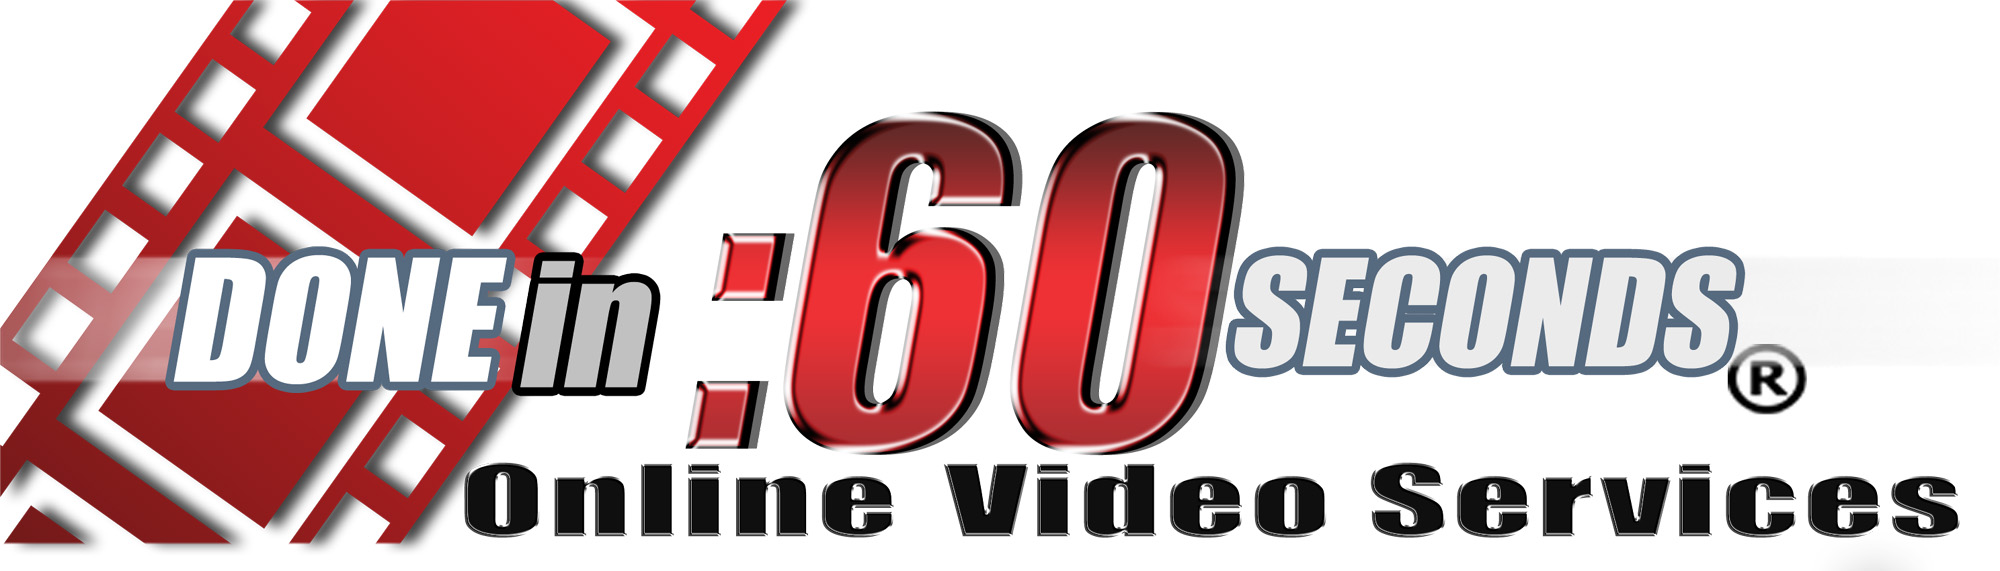 WEBSITE VIDEO PRODUCTION ORDERS